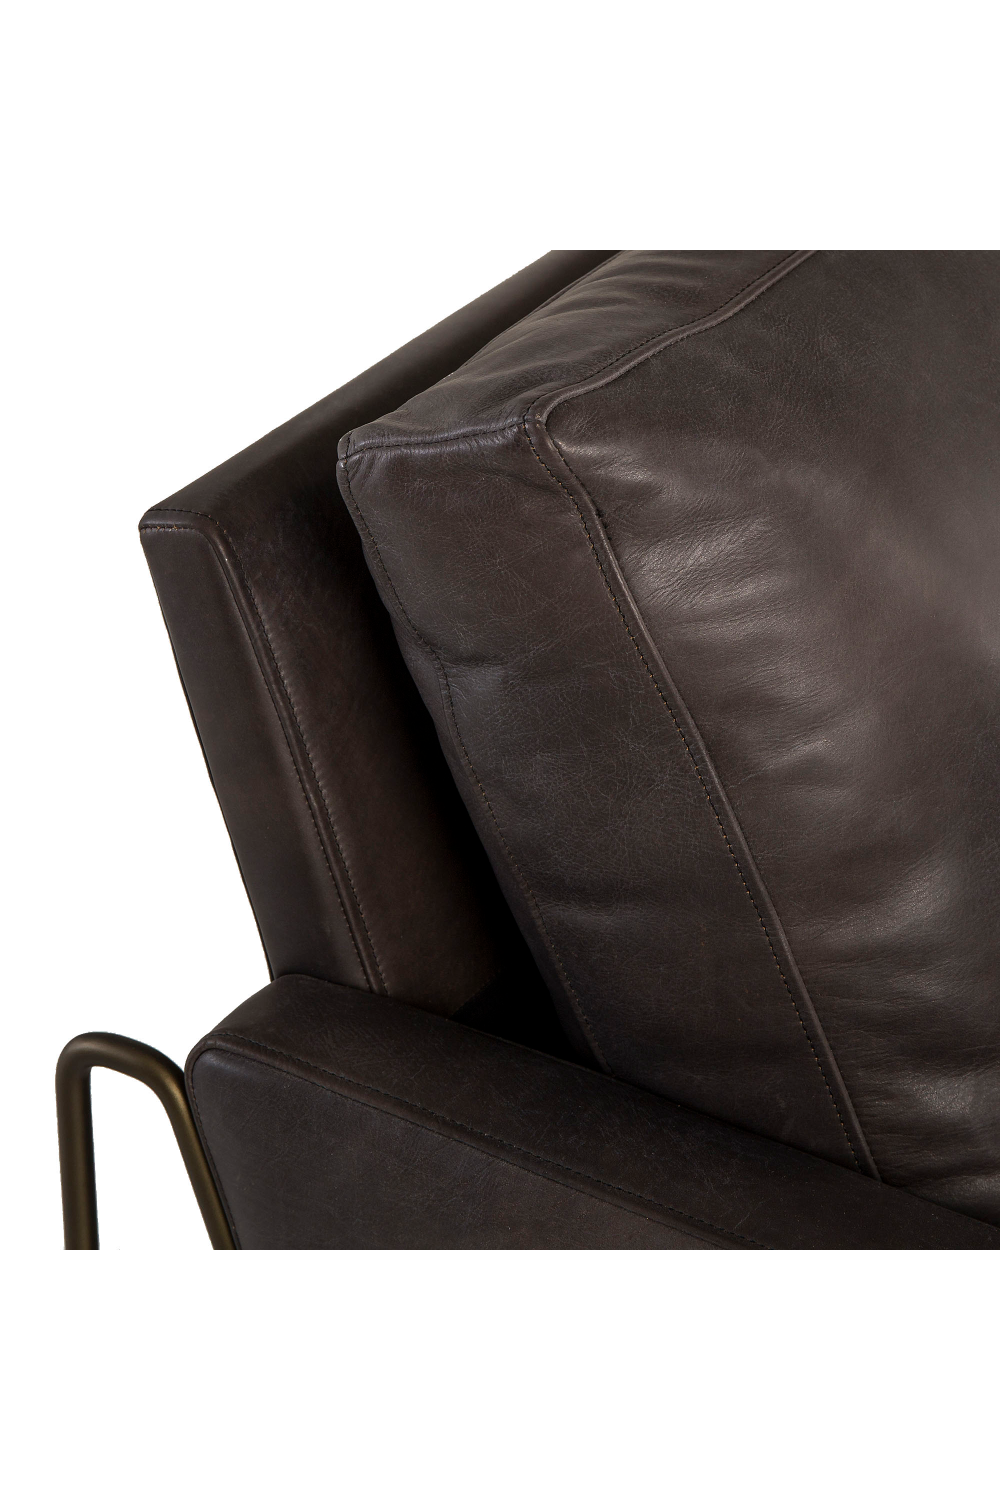 Destroyed Black Leather Upholstery Chair | Andrew Martin Vanessa  | OROA